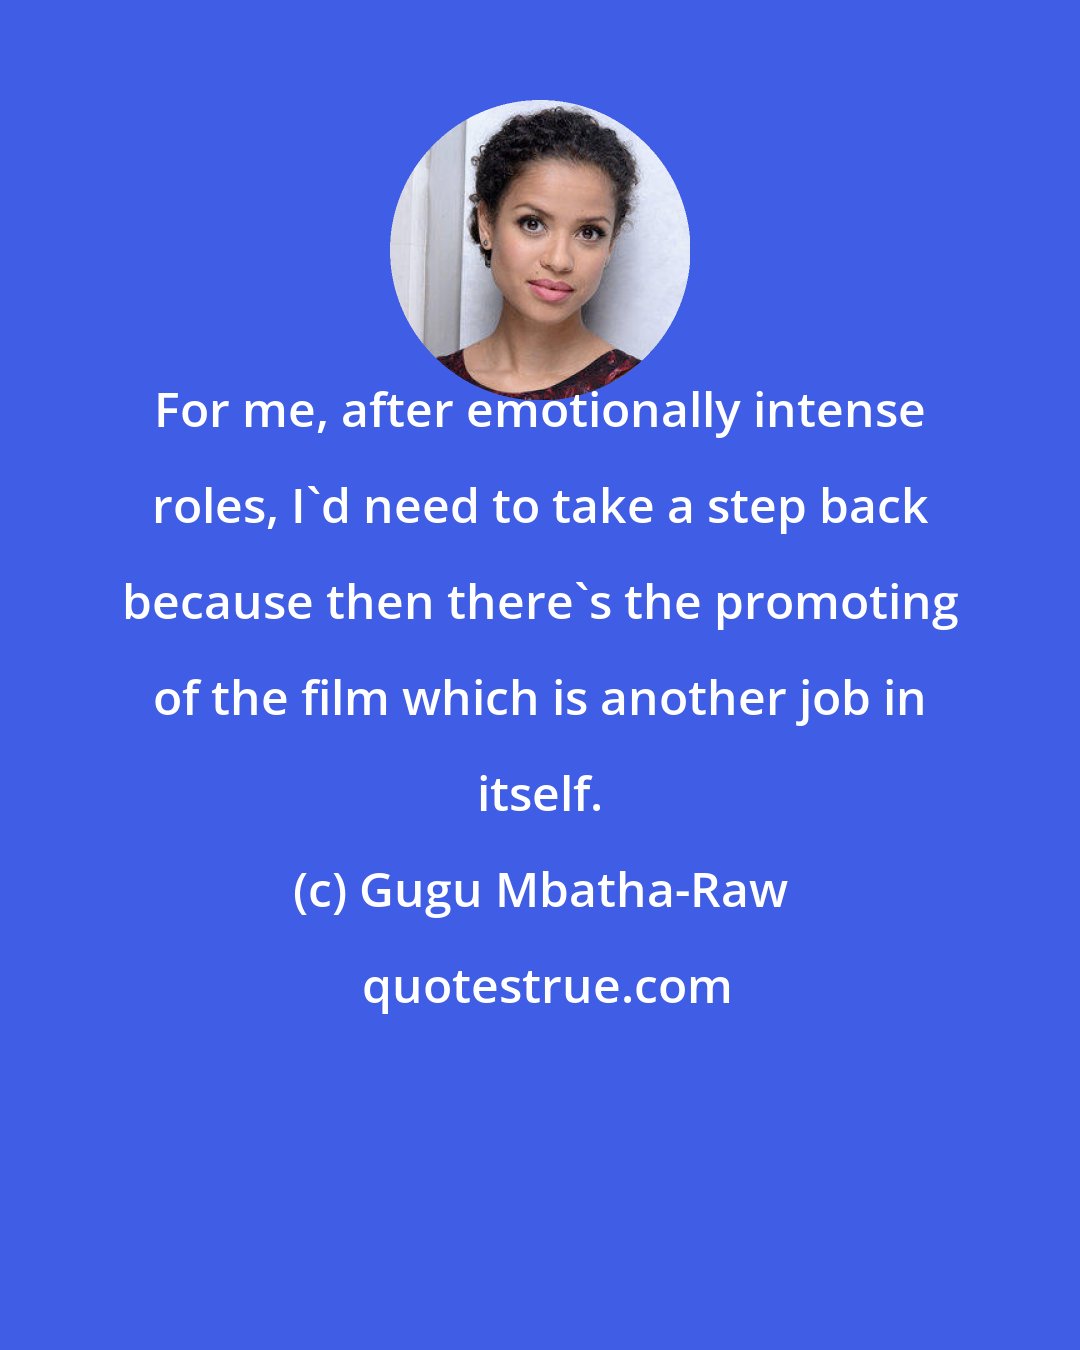 Gugu Mbatha-Raw: For me, after emotionally intense roles, I'd need to take a step back because then there's the promoting of the film which is another job in itself.